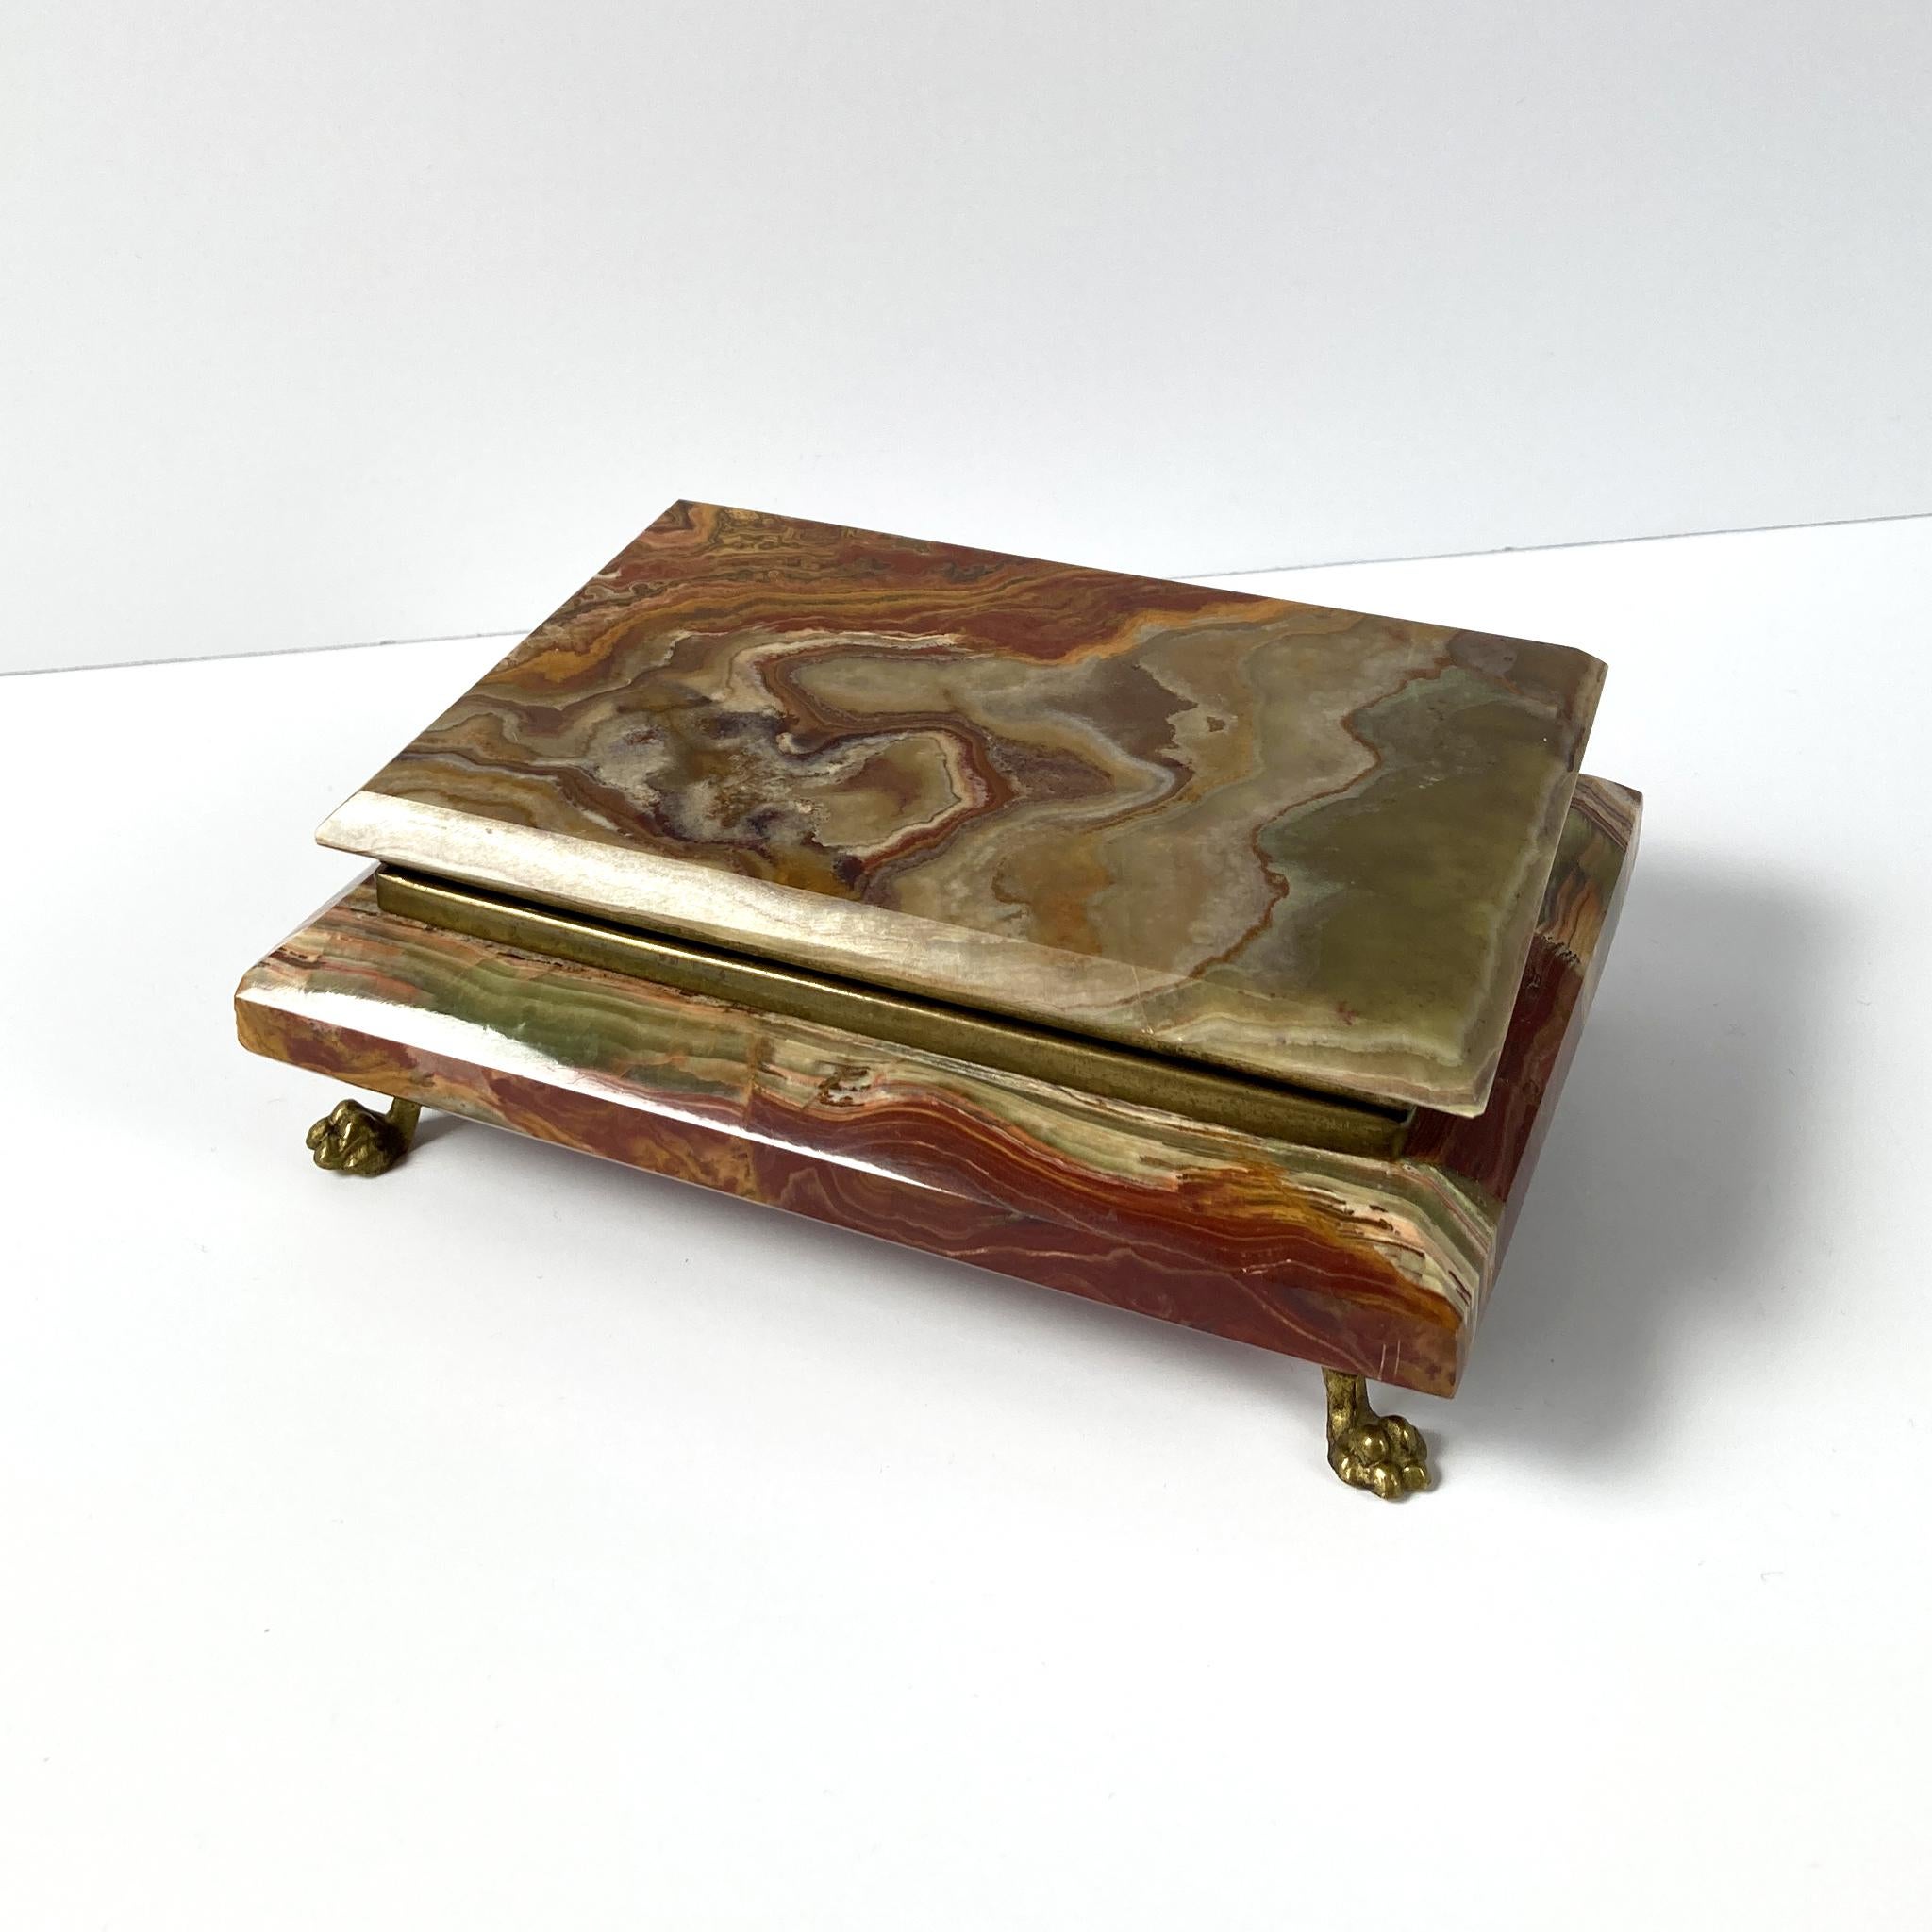 Stunning onyx marble box with brass hinged lid and charming brass feet. Lined with red velvet, which shows a black mark on the interior. The marble exhibits  swirls of brown, taupe, amber and red at every angle. In good vintage condition, no chips